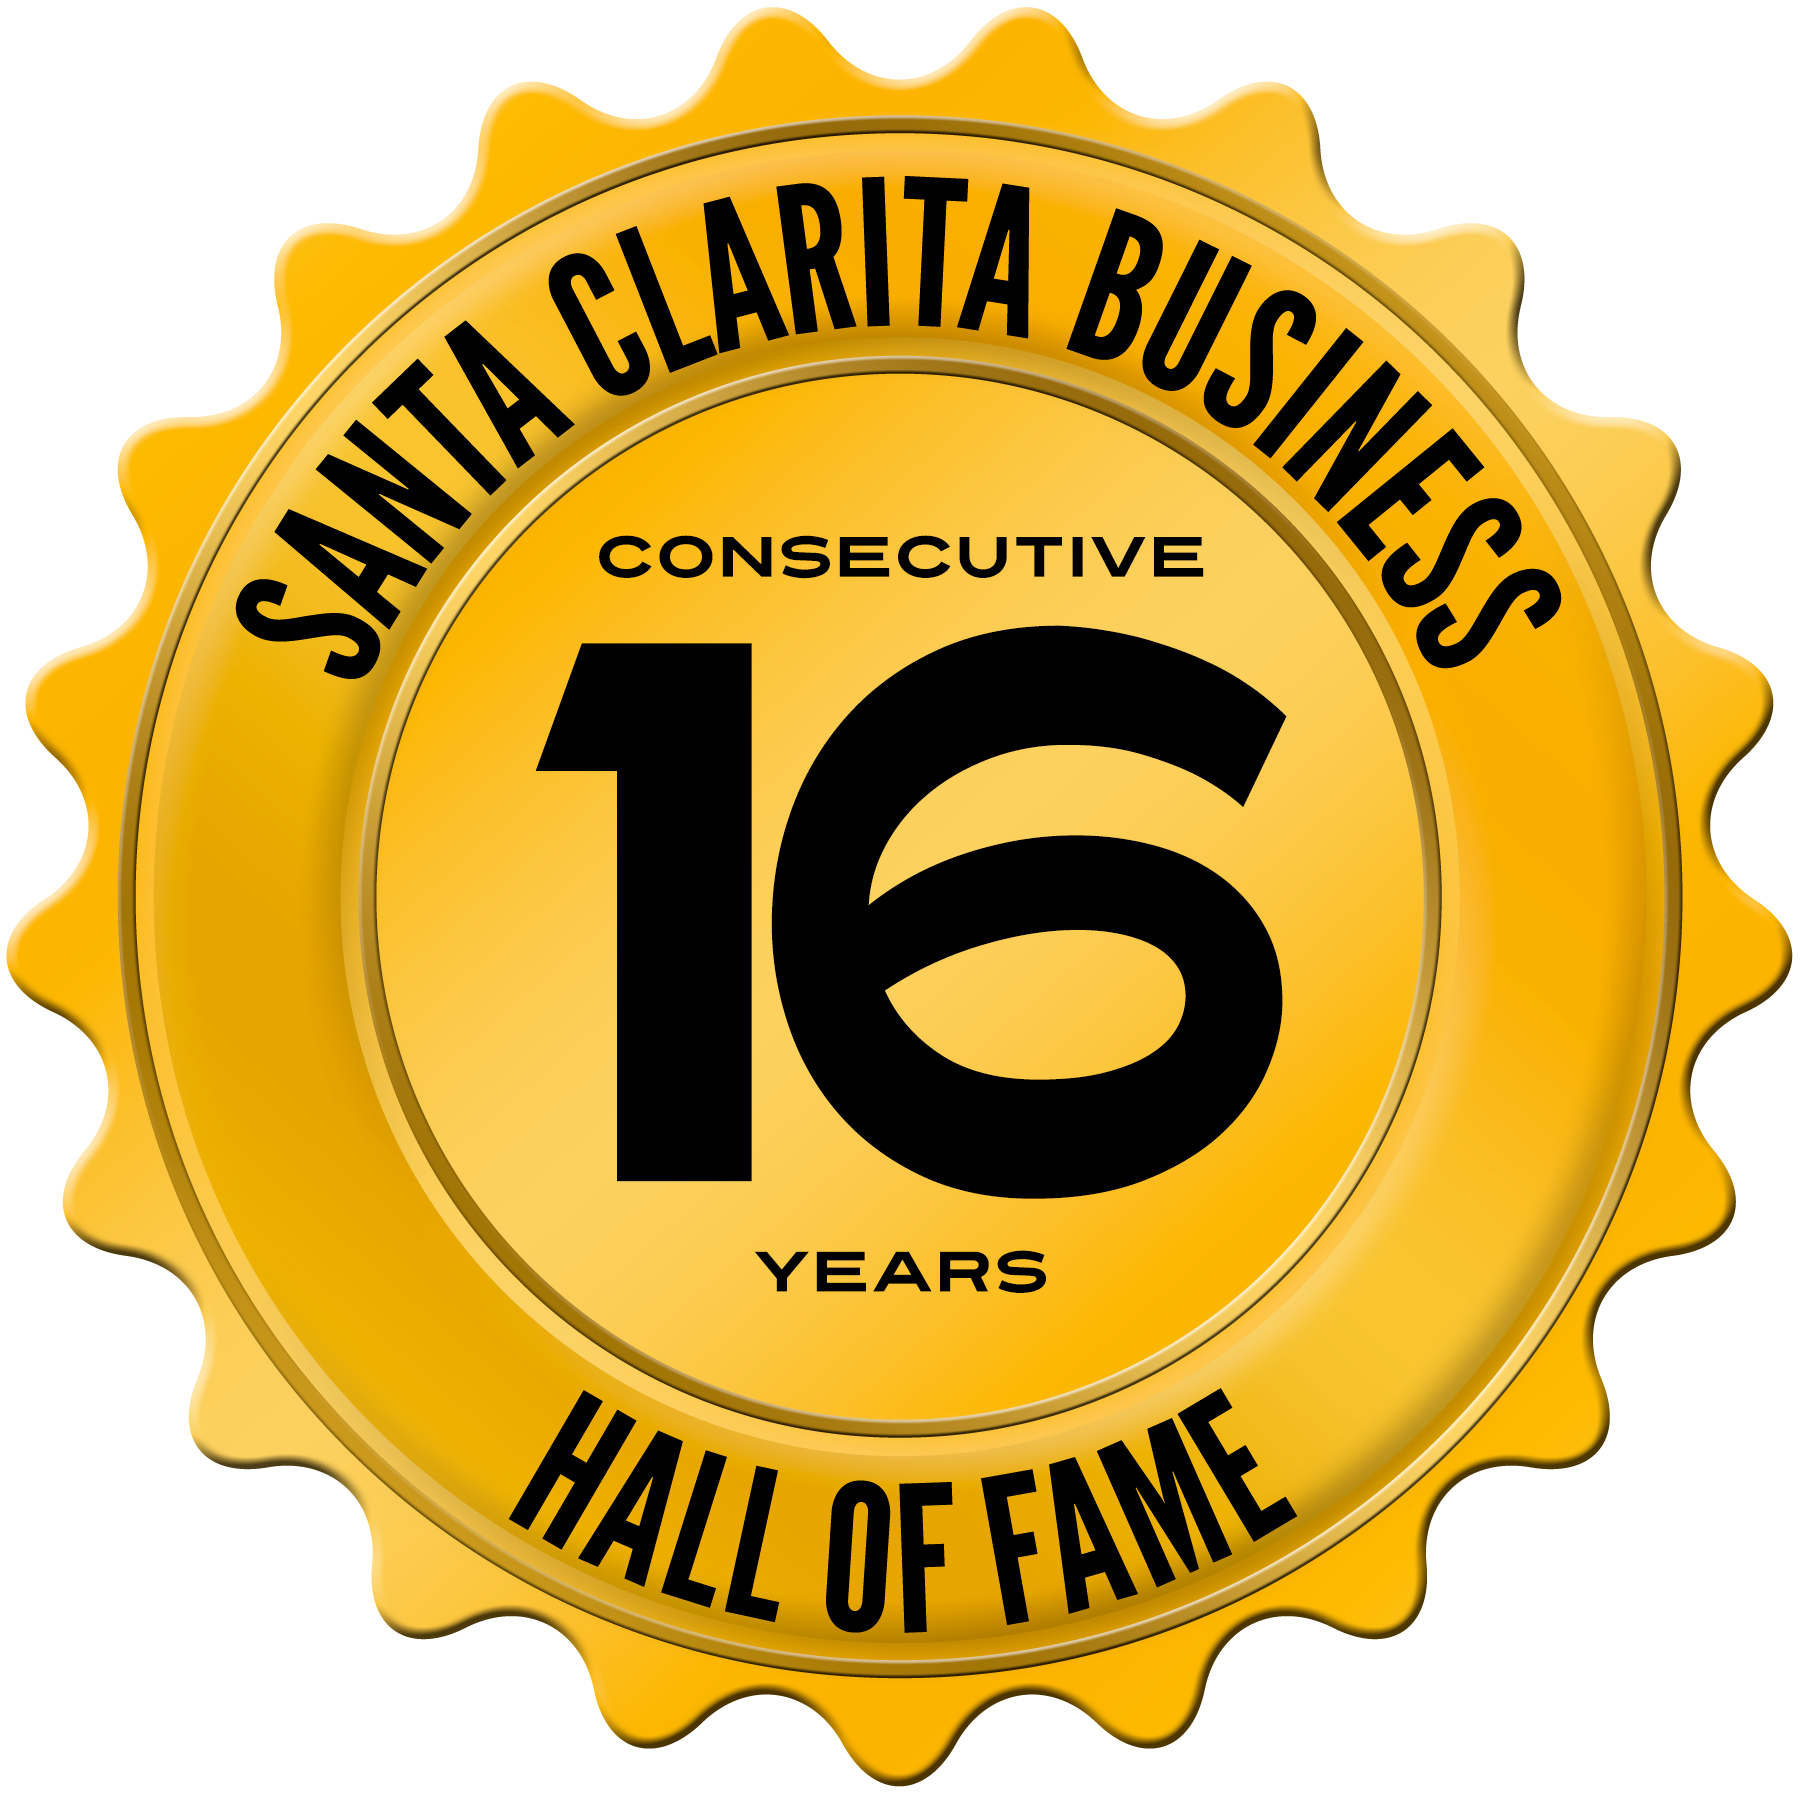 Santa Clarita Business Hall of Fame - Voted best performing arts school 15 consecutive years!